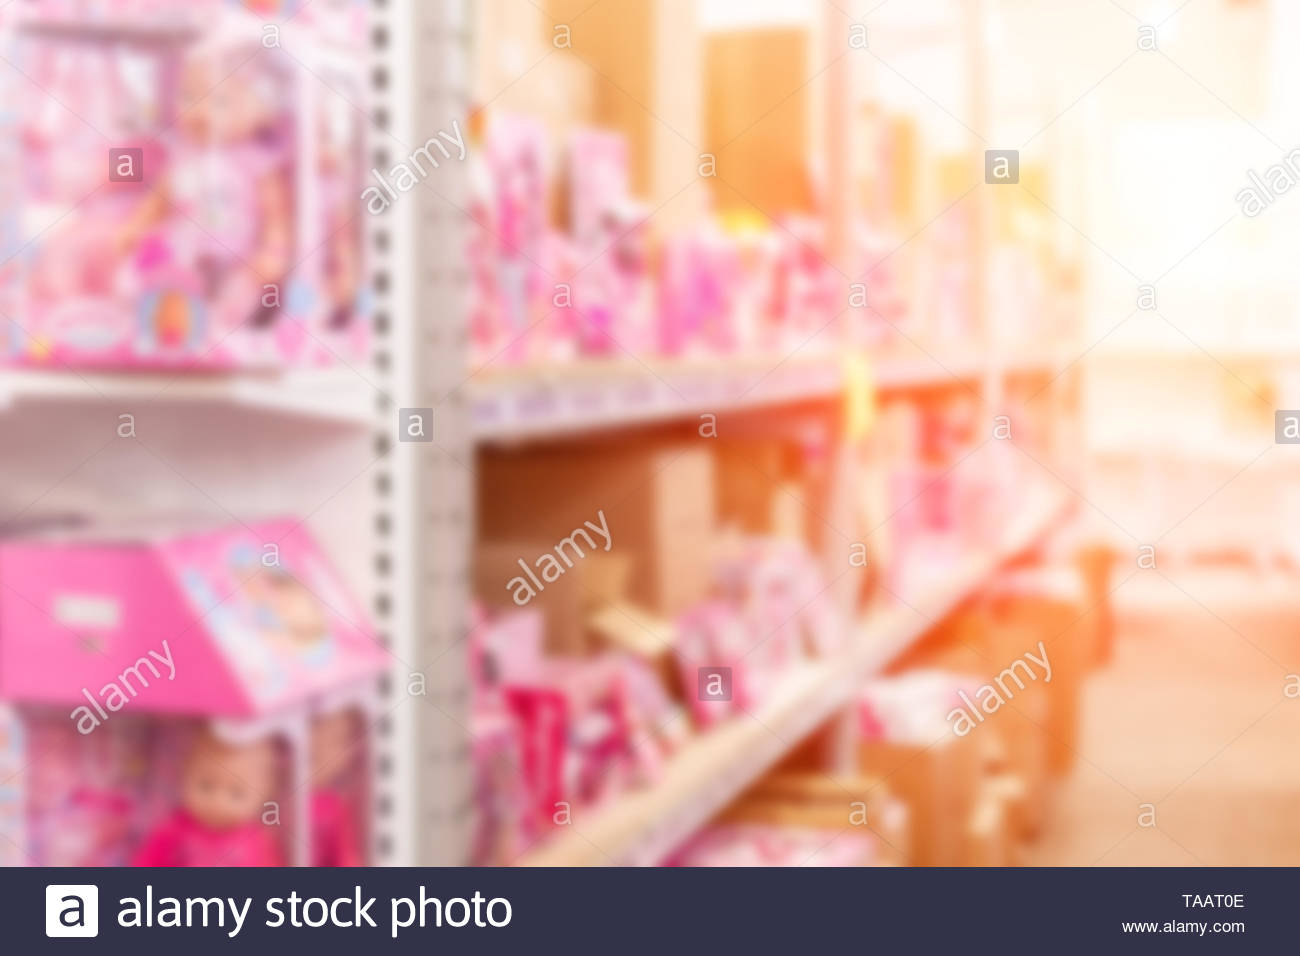 Abstract Blurred Background Of Wholesale Girs Toys And Dolls Shop